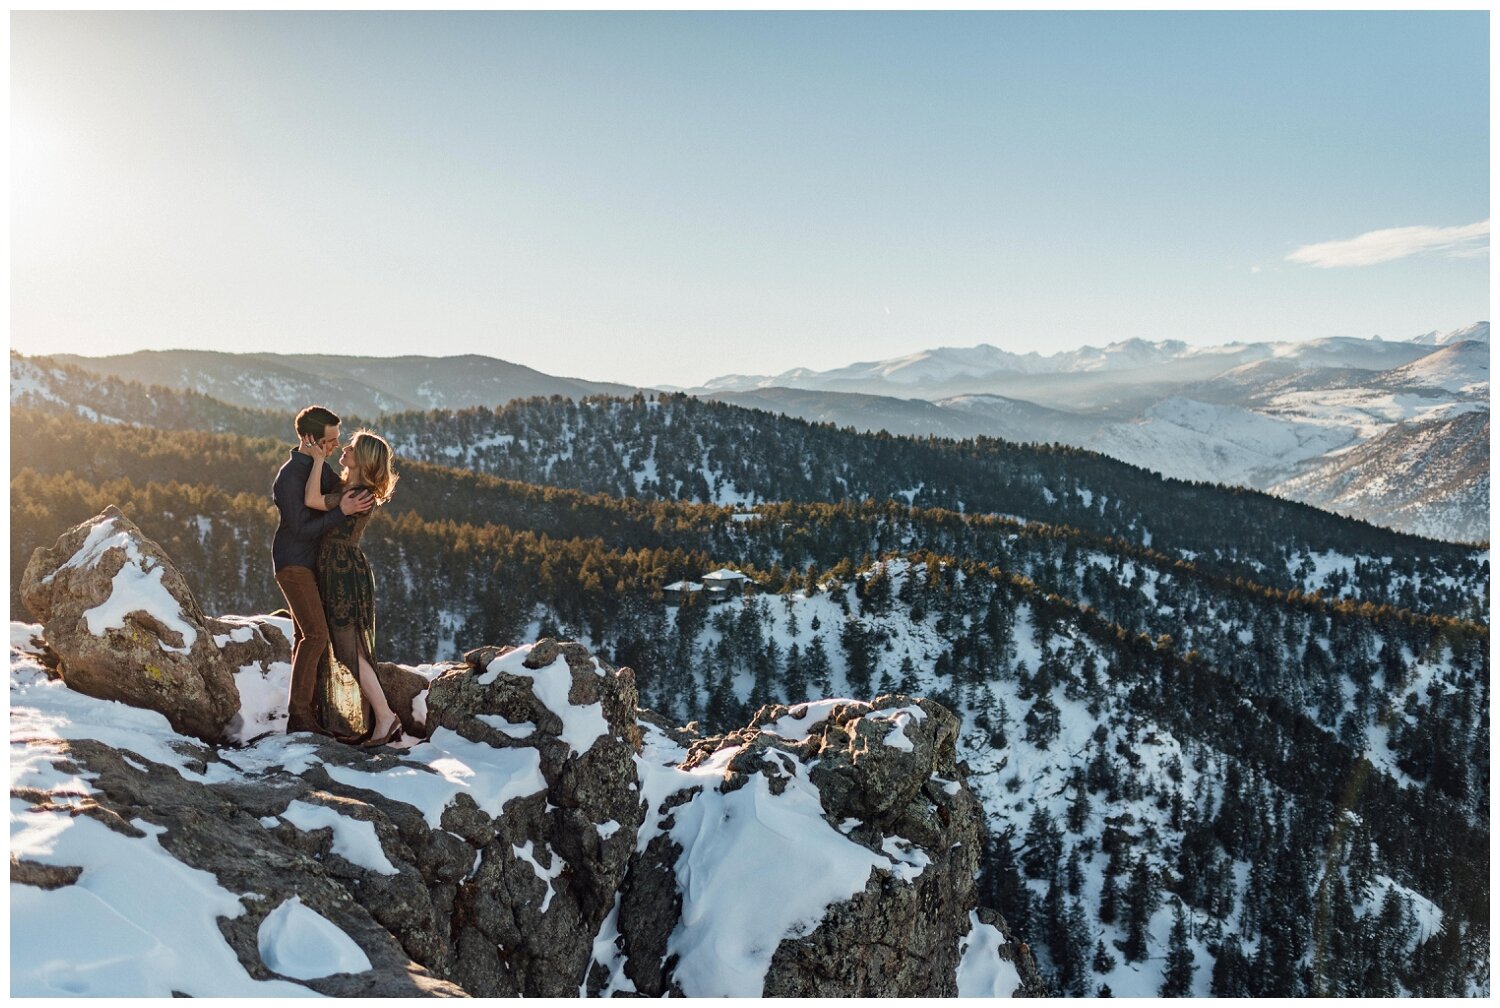  Lost Gulch Outlook Engagement Session, Colorado engagement photographer, Boulder Colorado Engagement, Mountain Engagement in Colorado, Winter Colorado Engagement, Colorado Engagement ideas, Colorado engagement inspiration, Colorado, mountain engagem